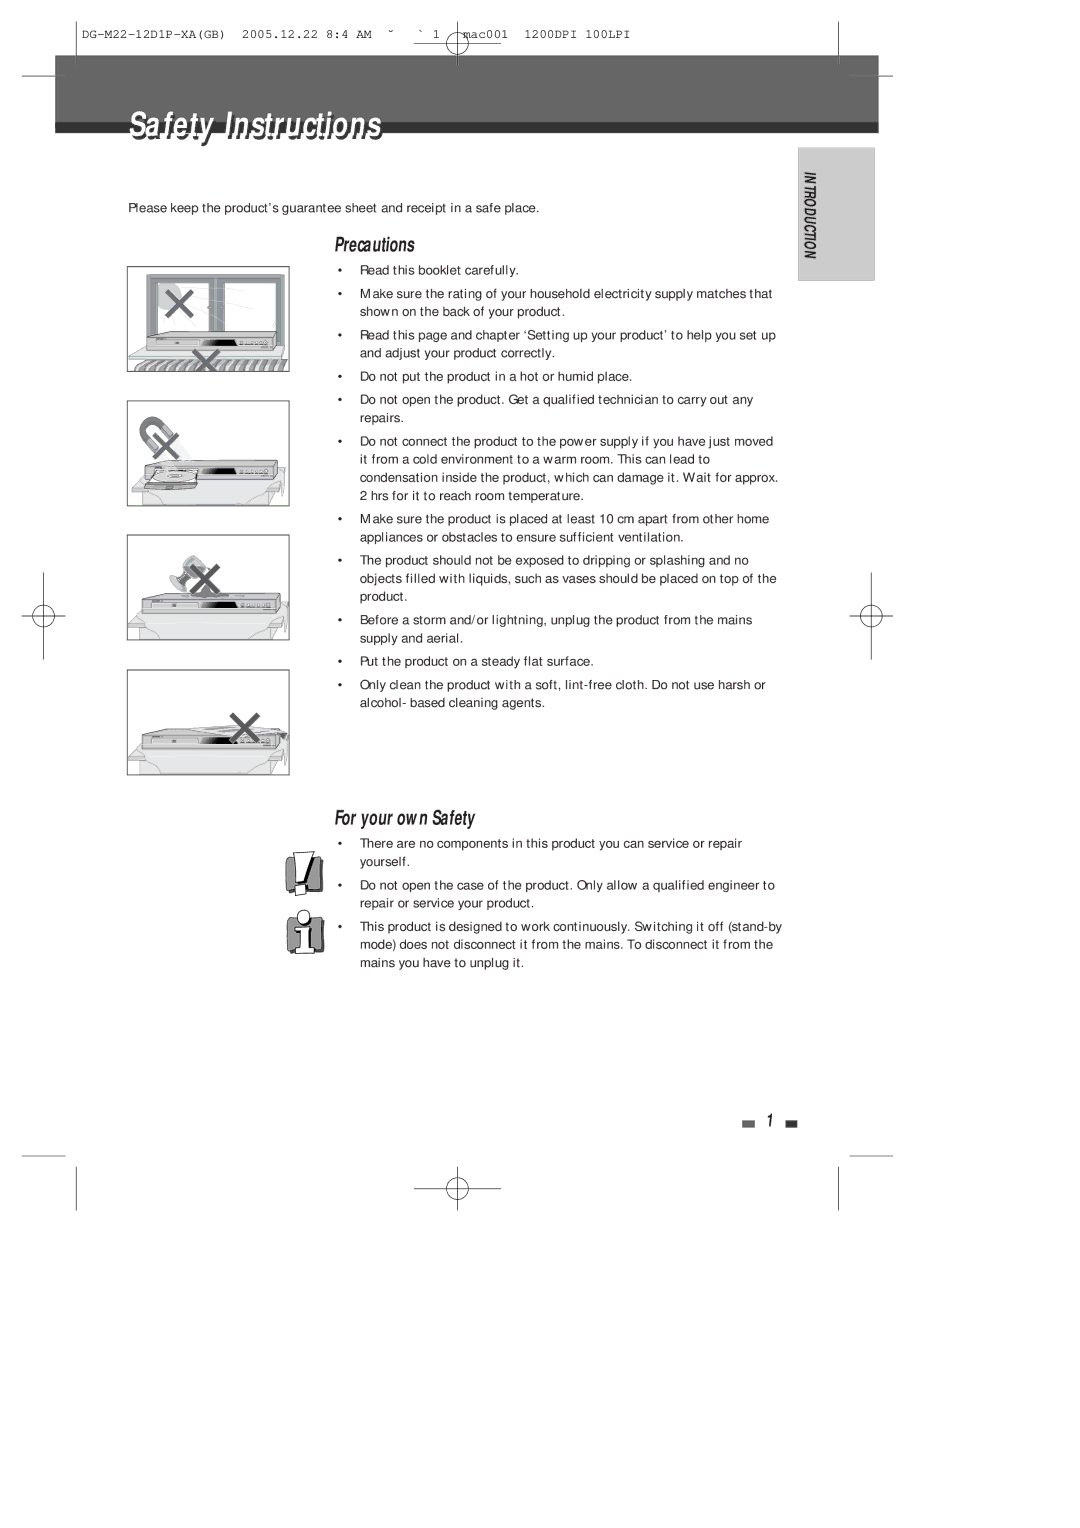 Daewoo DHR-8100P user manual Safetyty InstructionsI t ti, Precautions, For your own Safety 